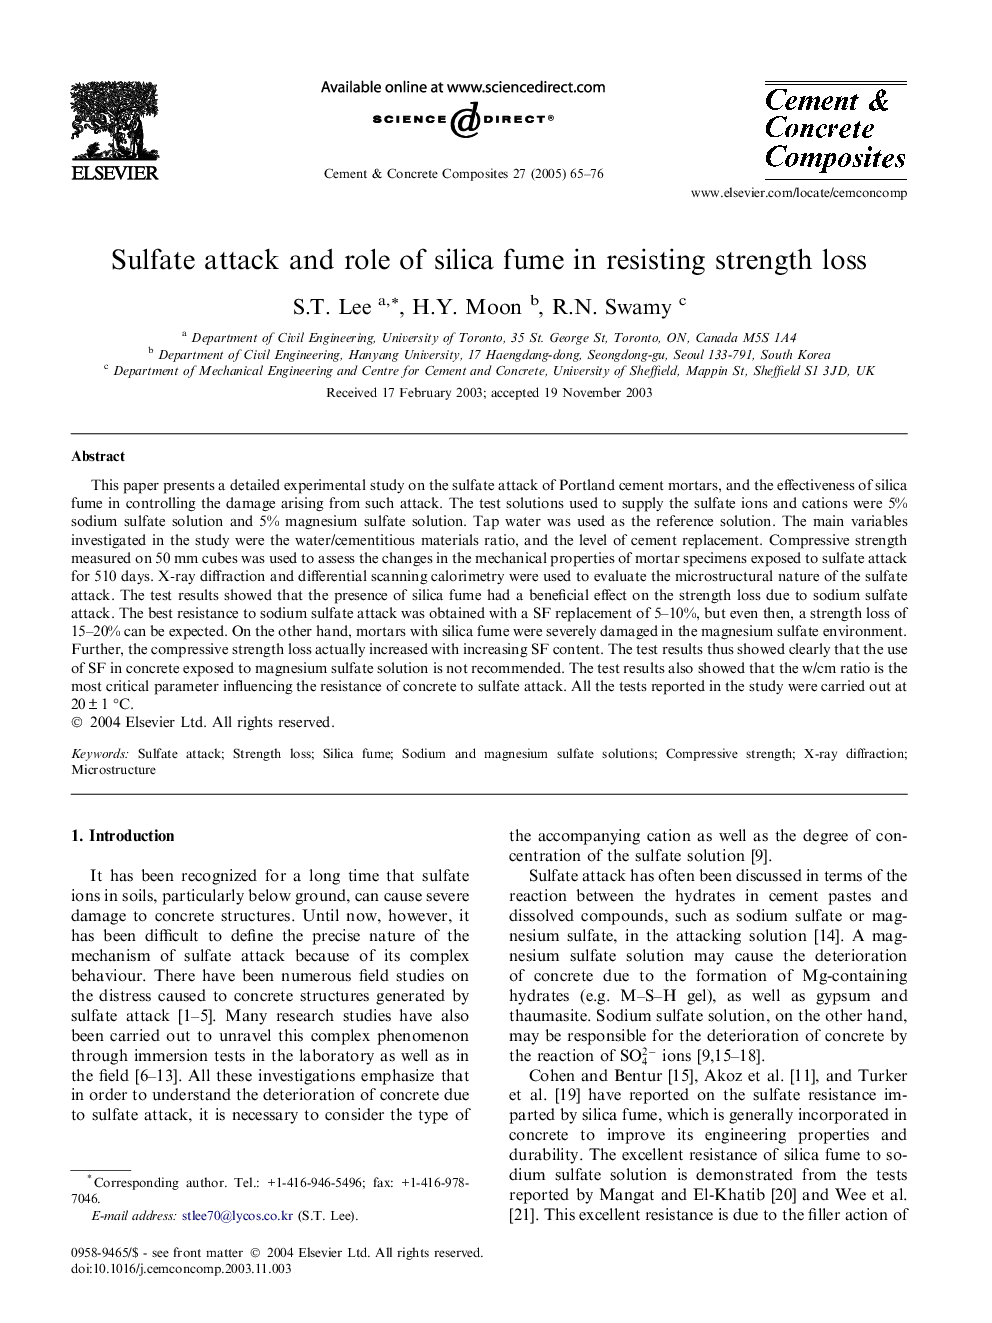 Sulfate attack and role of silica fume in resisting strength loss